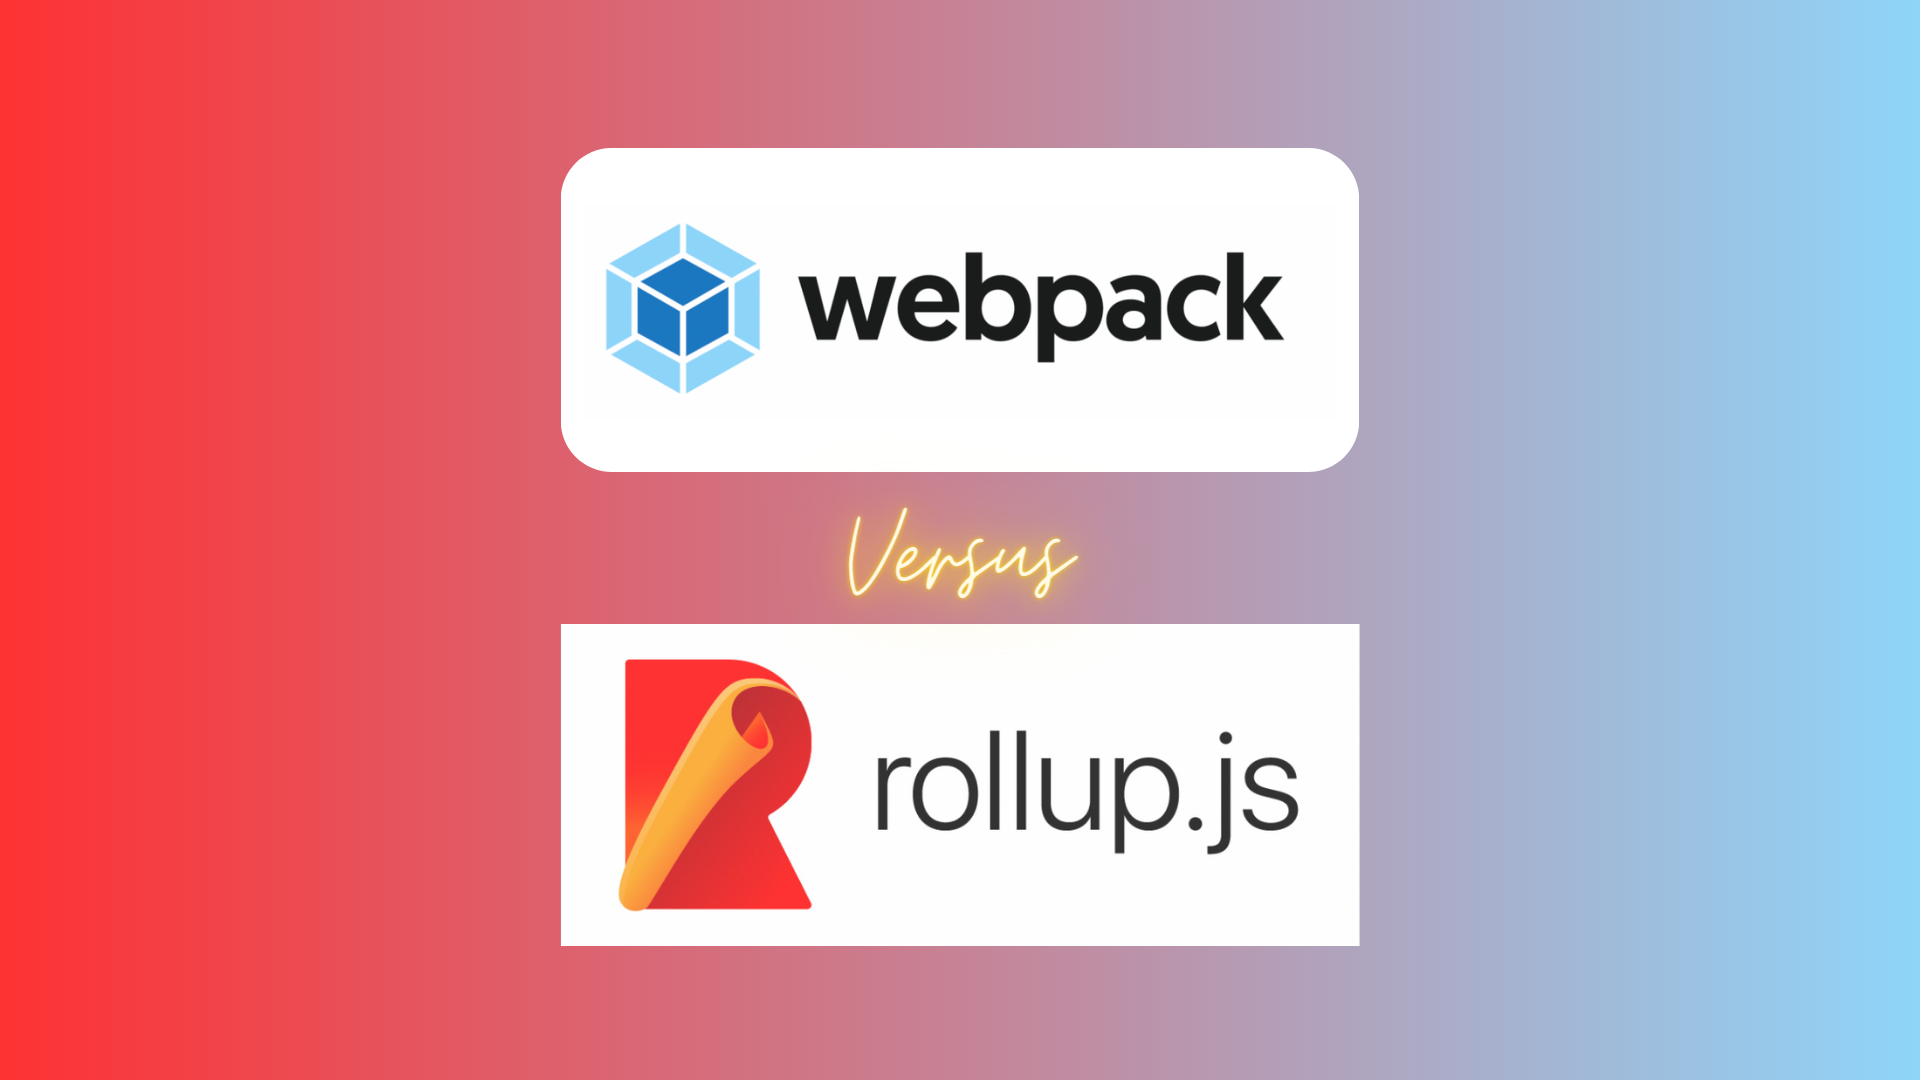 Webpack vs Rollup with logos on blended red and blue background.